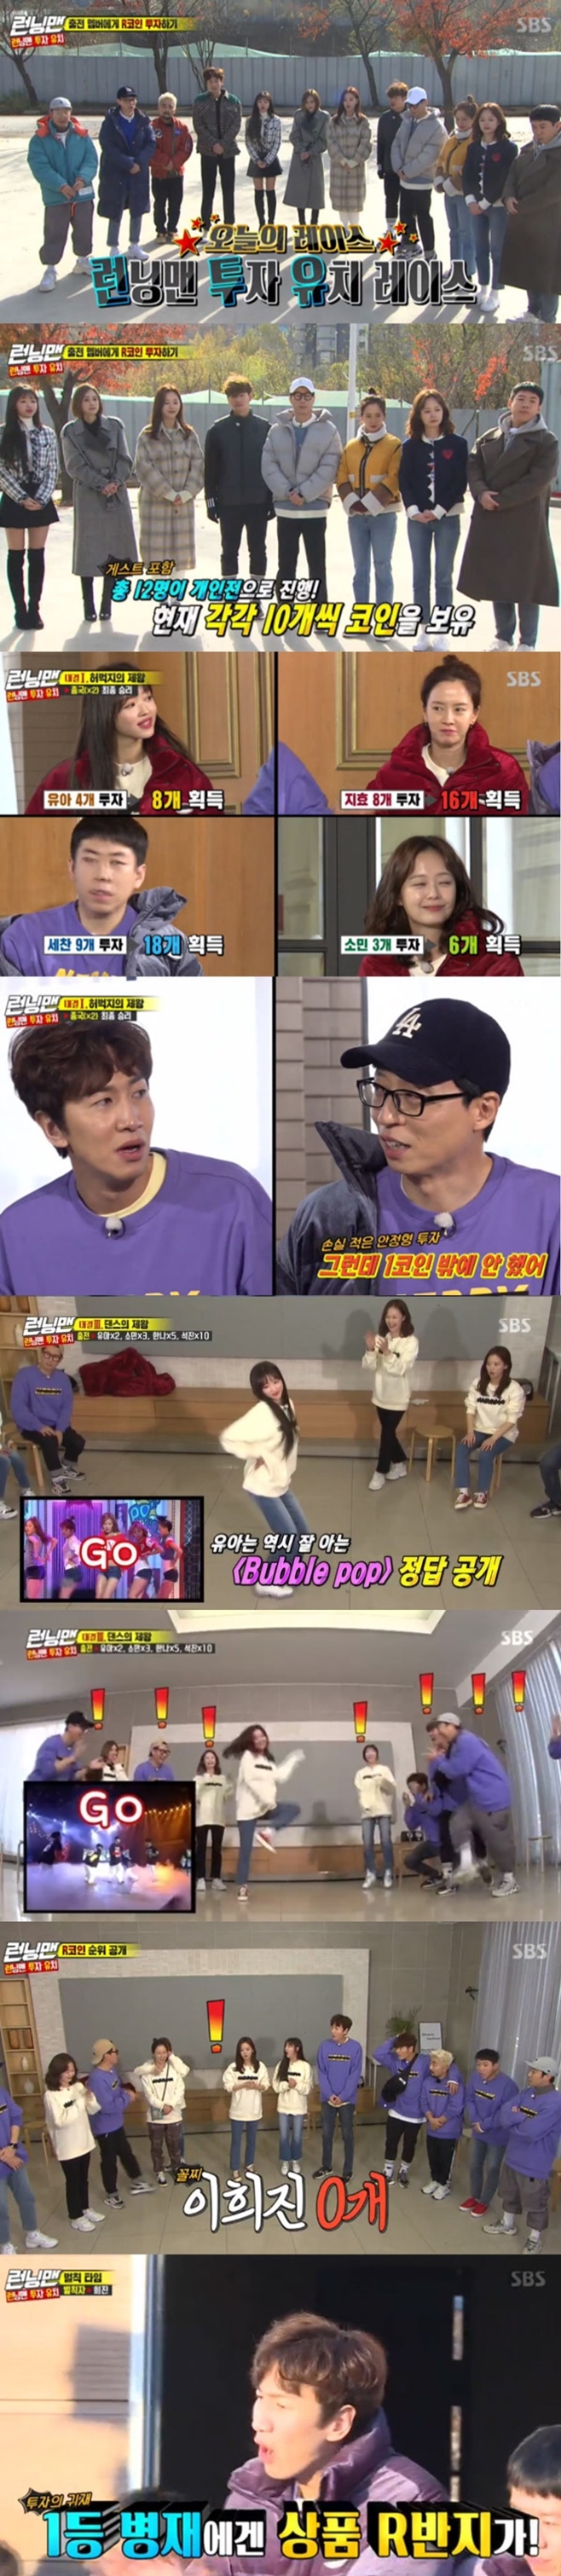 Lee Hee-Jins penalty scene took the best minute of Running Man TV viewer ratings.According to Nielsen Korea, a TV viewer rating research institute, Running Man, which was broadcast on the 8th, recorded 3.7% of 2049 target TV viewer ratings (based on the second part of the Seoul metropolitan area furniture TV ratings).The average TV viewer ratings were 5% for the first part and 7.1% for the second part, while the highest TV viewer ratings per minute soared to 7.9%.The broadcast was held as Running Man Investment Attraction Race, with actors Kang Han-na, Lee Hee-Jin, YooAA of Oh My Girl and broadcaster Yoo Byung-jae as guests.Members can invest RCOIN in each round to call their assets, and the person with the least RCOIN will be punished.The first confrontation was the Lord of the thighs as a pain-bearing confrontation.With Kim Jong-kook winning as expected by everyone, Lee Kwang-soo was hit by Kim Jong-kook on the thigh and pulled out painfully to laugh.Song Ji-hyo, Jeon So-min, Yang Se-chan and YooAA, who invested in Kim Jong-kook, were called RCOIN.In the second showdown quiz, The King of Quiz, Haha, Lee Kwang-soo, and Yoo Byung-jae, who invested in him as Brain YooA Jae-Suk won the championship, earned twice as much COIN.In the third showdown, The King of Dance, the Dance Shin Dance King YooAAs big success attracted attention and won first place, and investors YooA Jae-Suk, Kim Jong-kook and Yoo Byung-jae also succeeded in being called COIN.In particular, Yoo Byung-jae won the final prize with a lot of COIN in the final match, and Lee Hee-Jin won the Water bomb penalty with 0 COIN.The scene was the best TV viewer rating per minute at 7.9%.